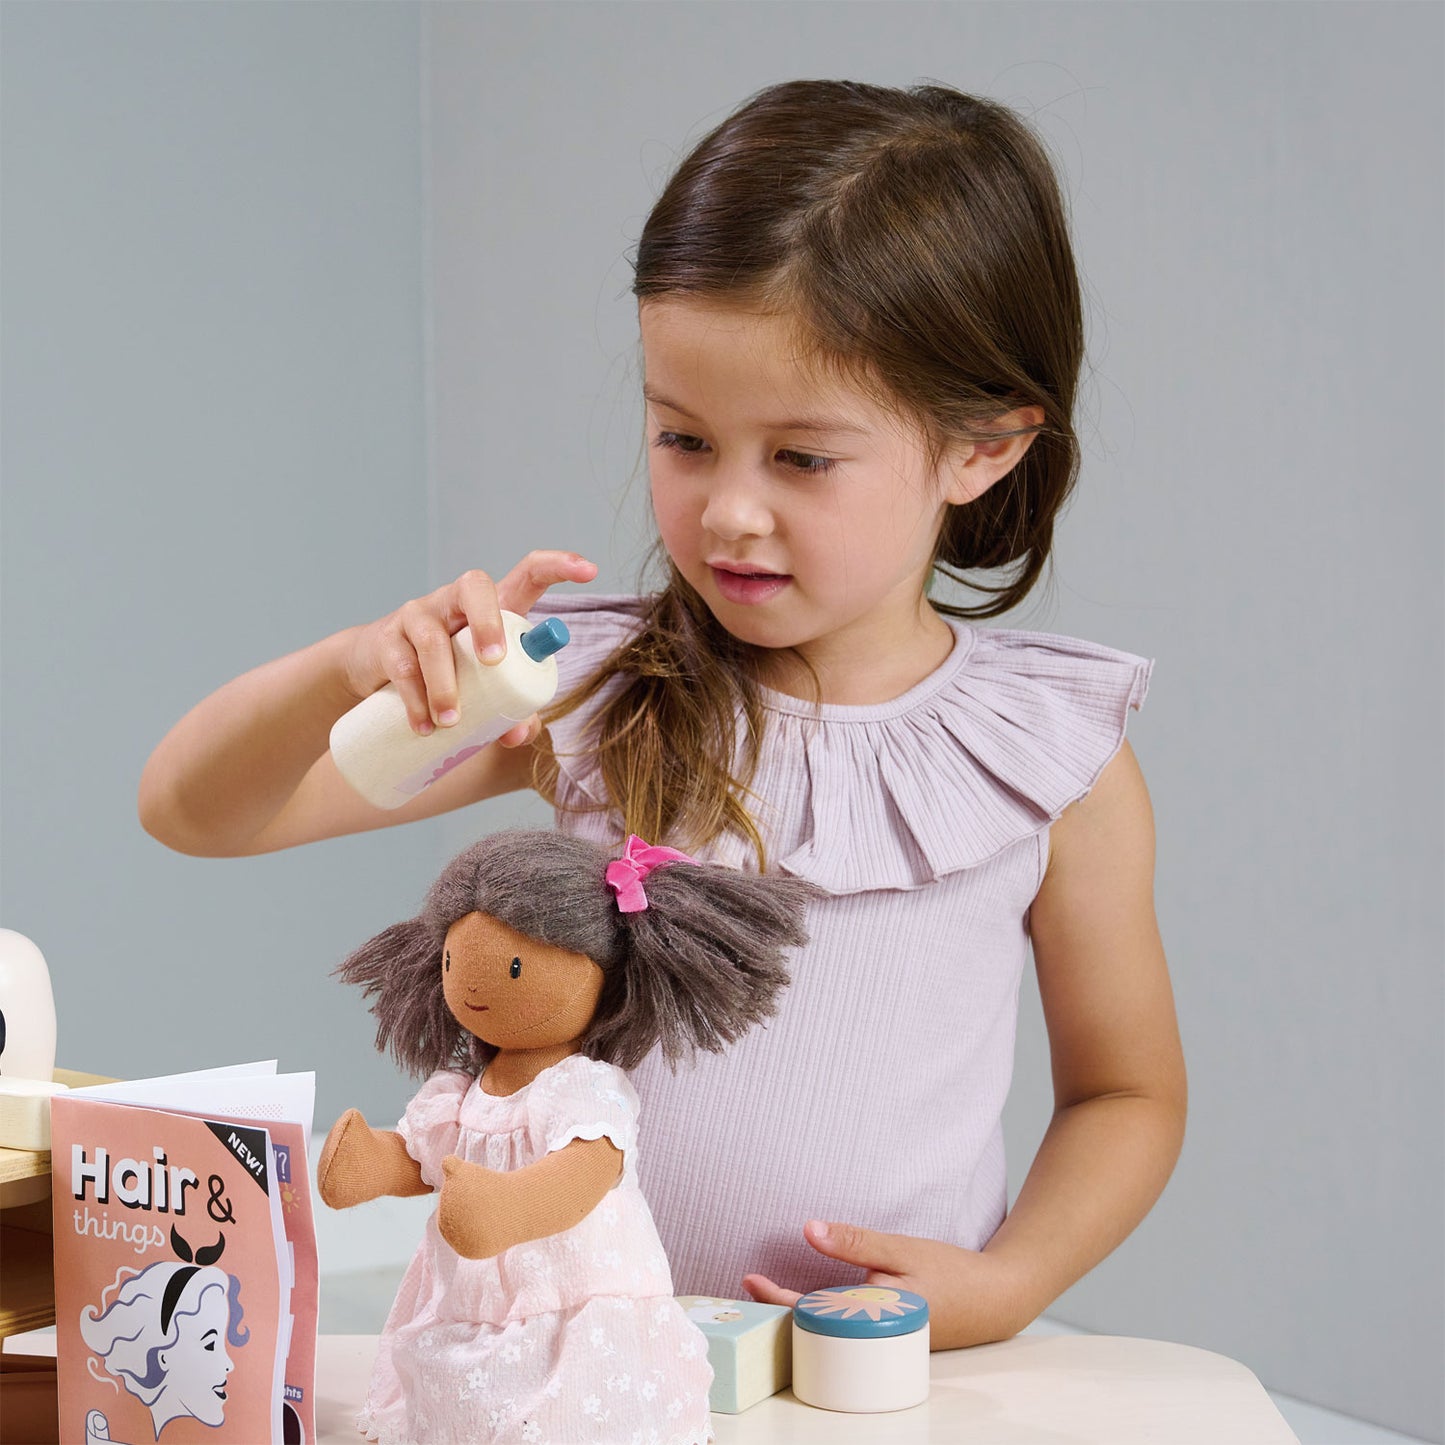 Child playing with wooden pretend play hair salon.  Spraying doll's hair.  